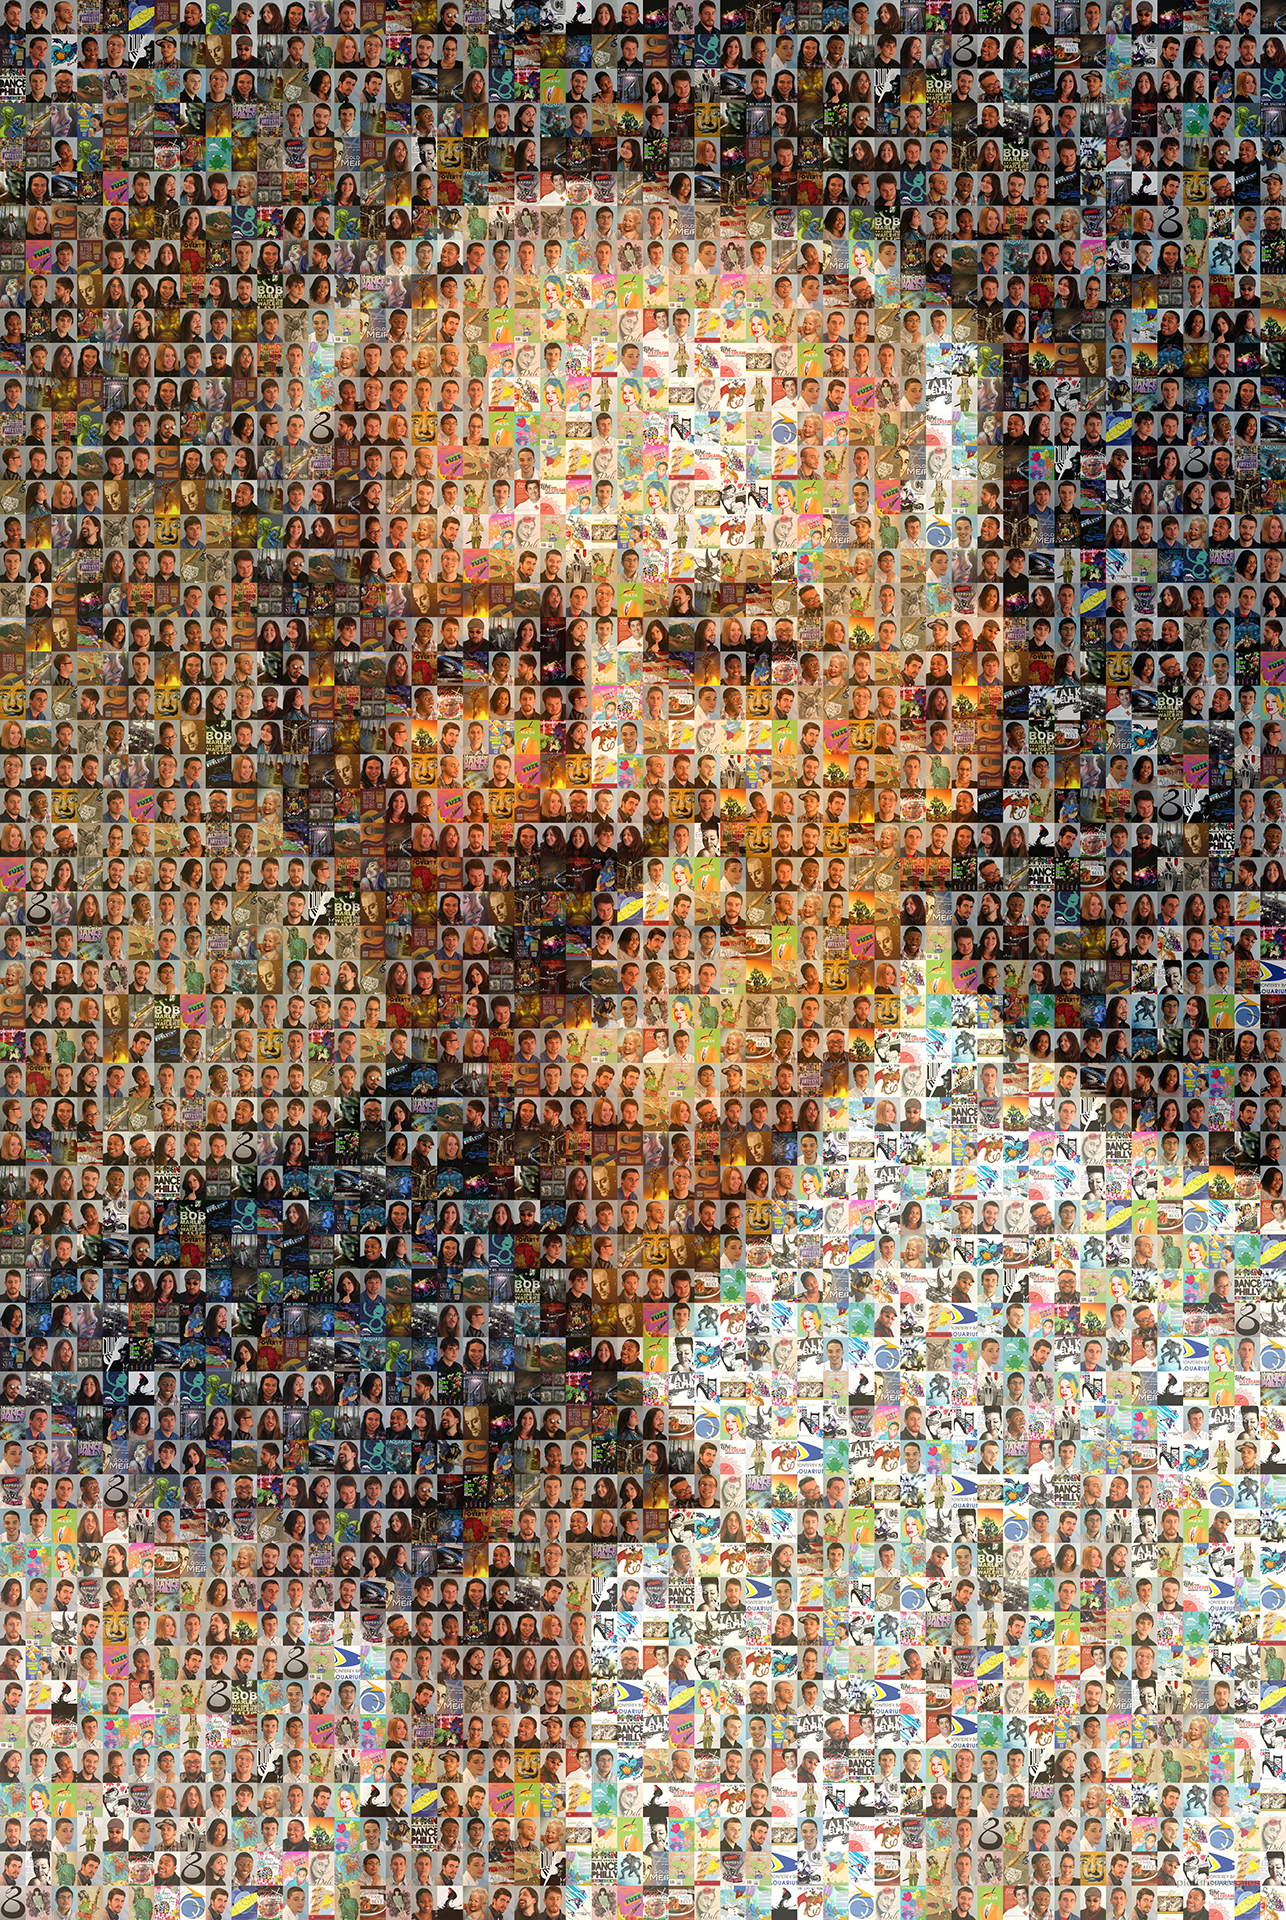 photo mosaic created using 156 student photos and their artwork